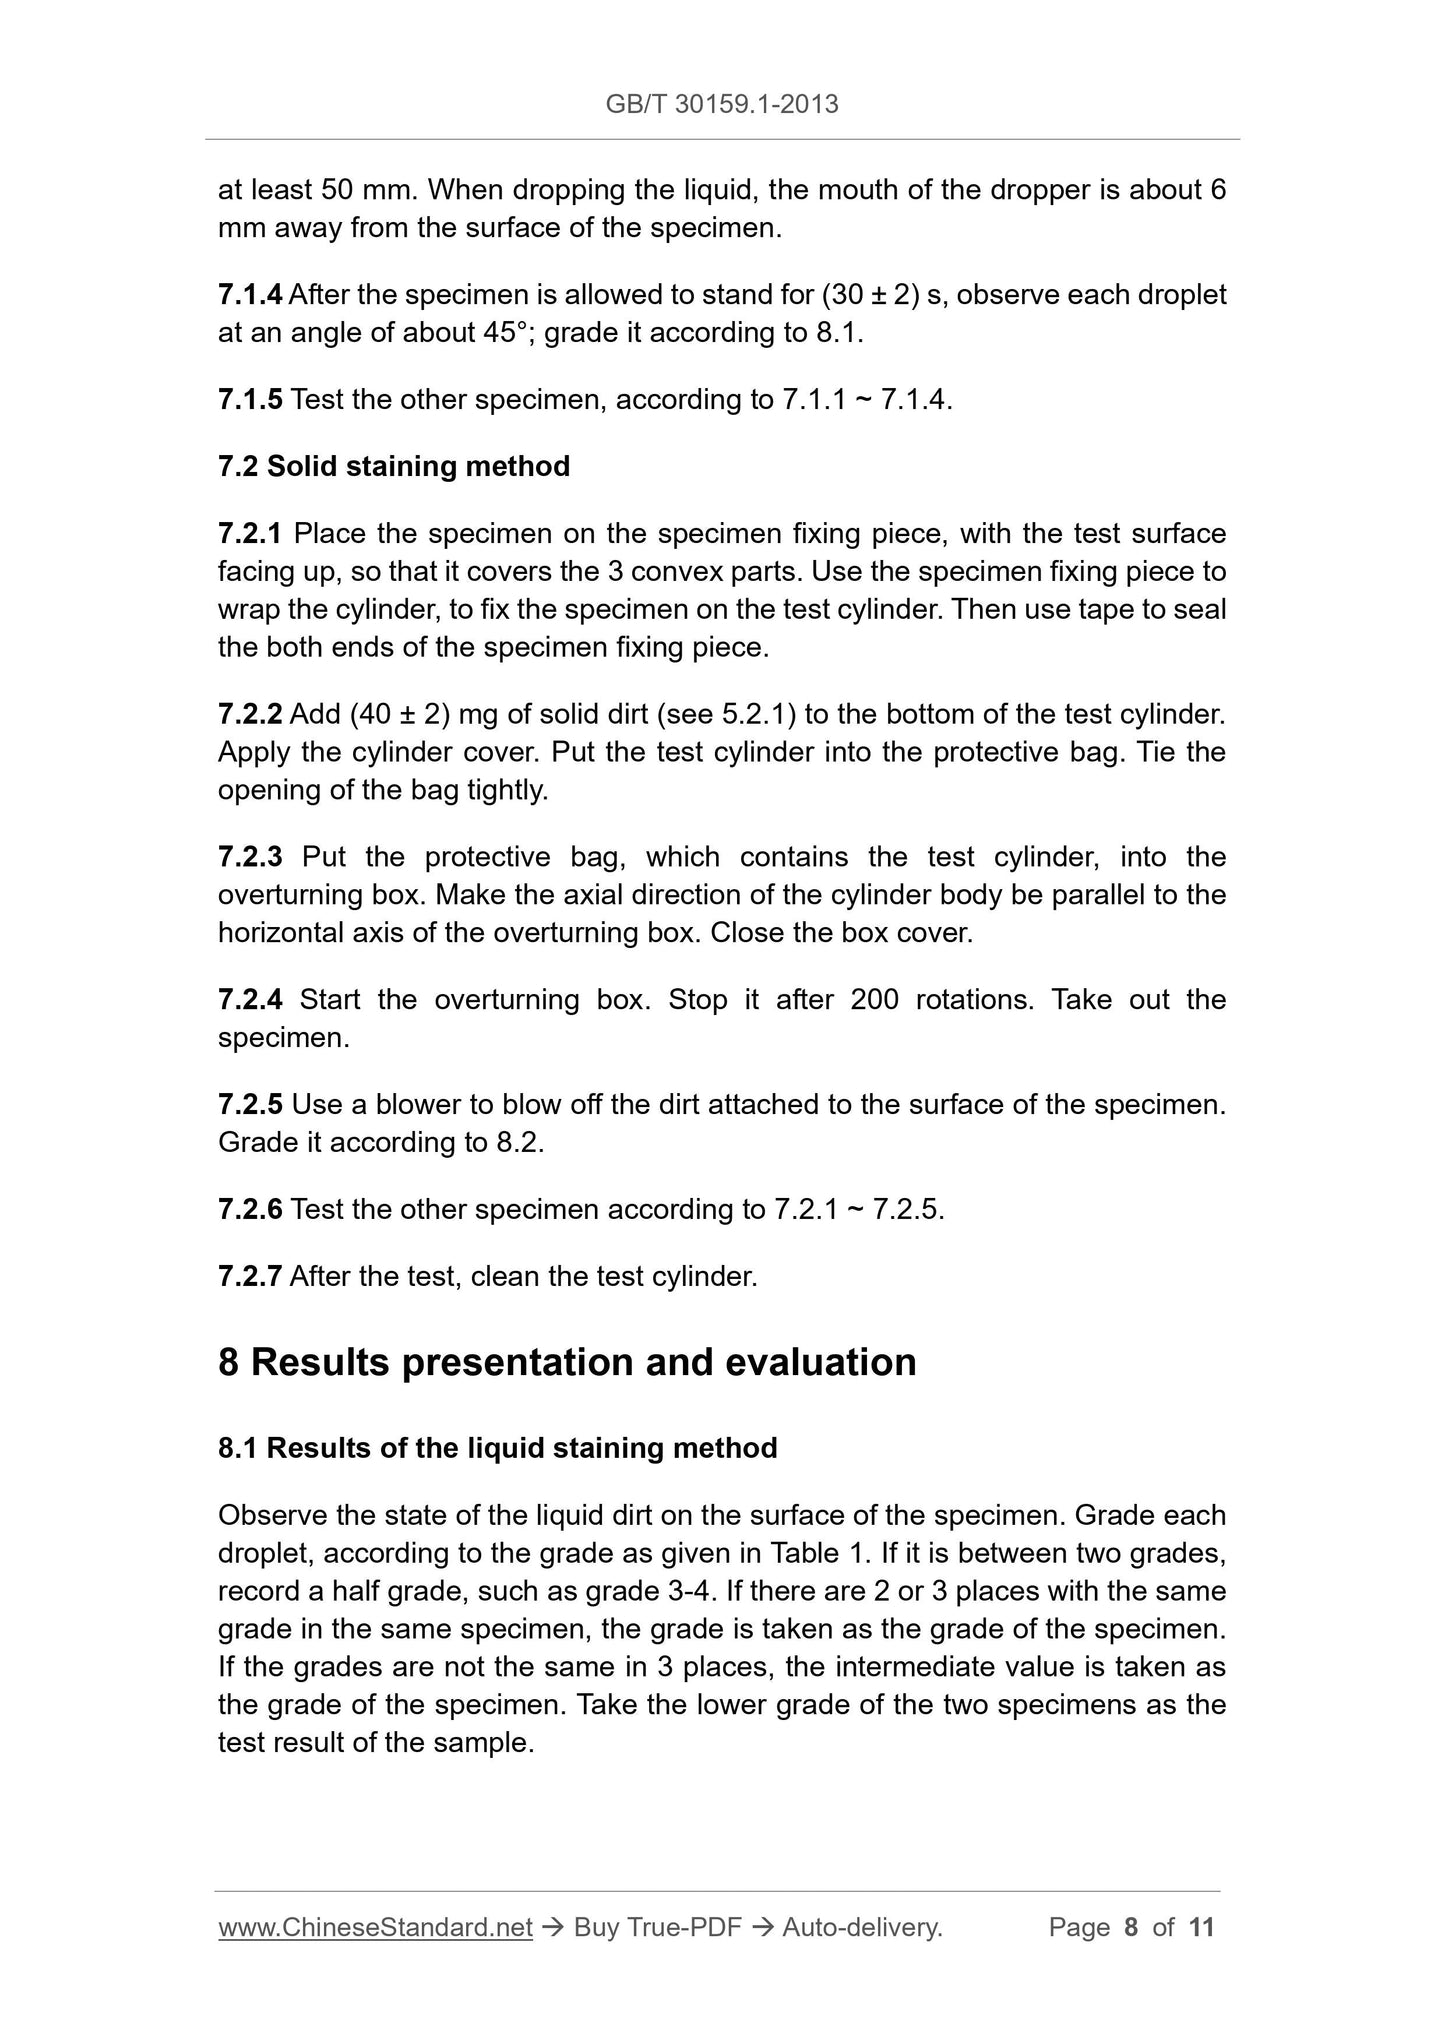 GB/T 30159.1-2013 Page 5